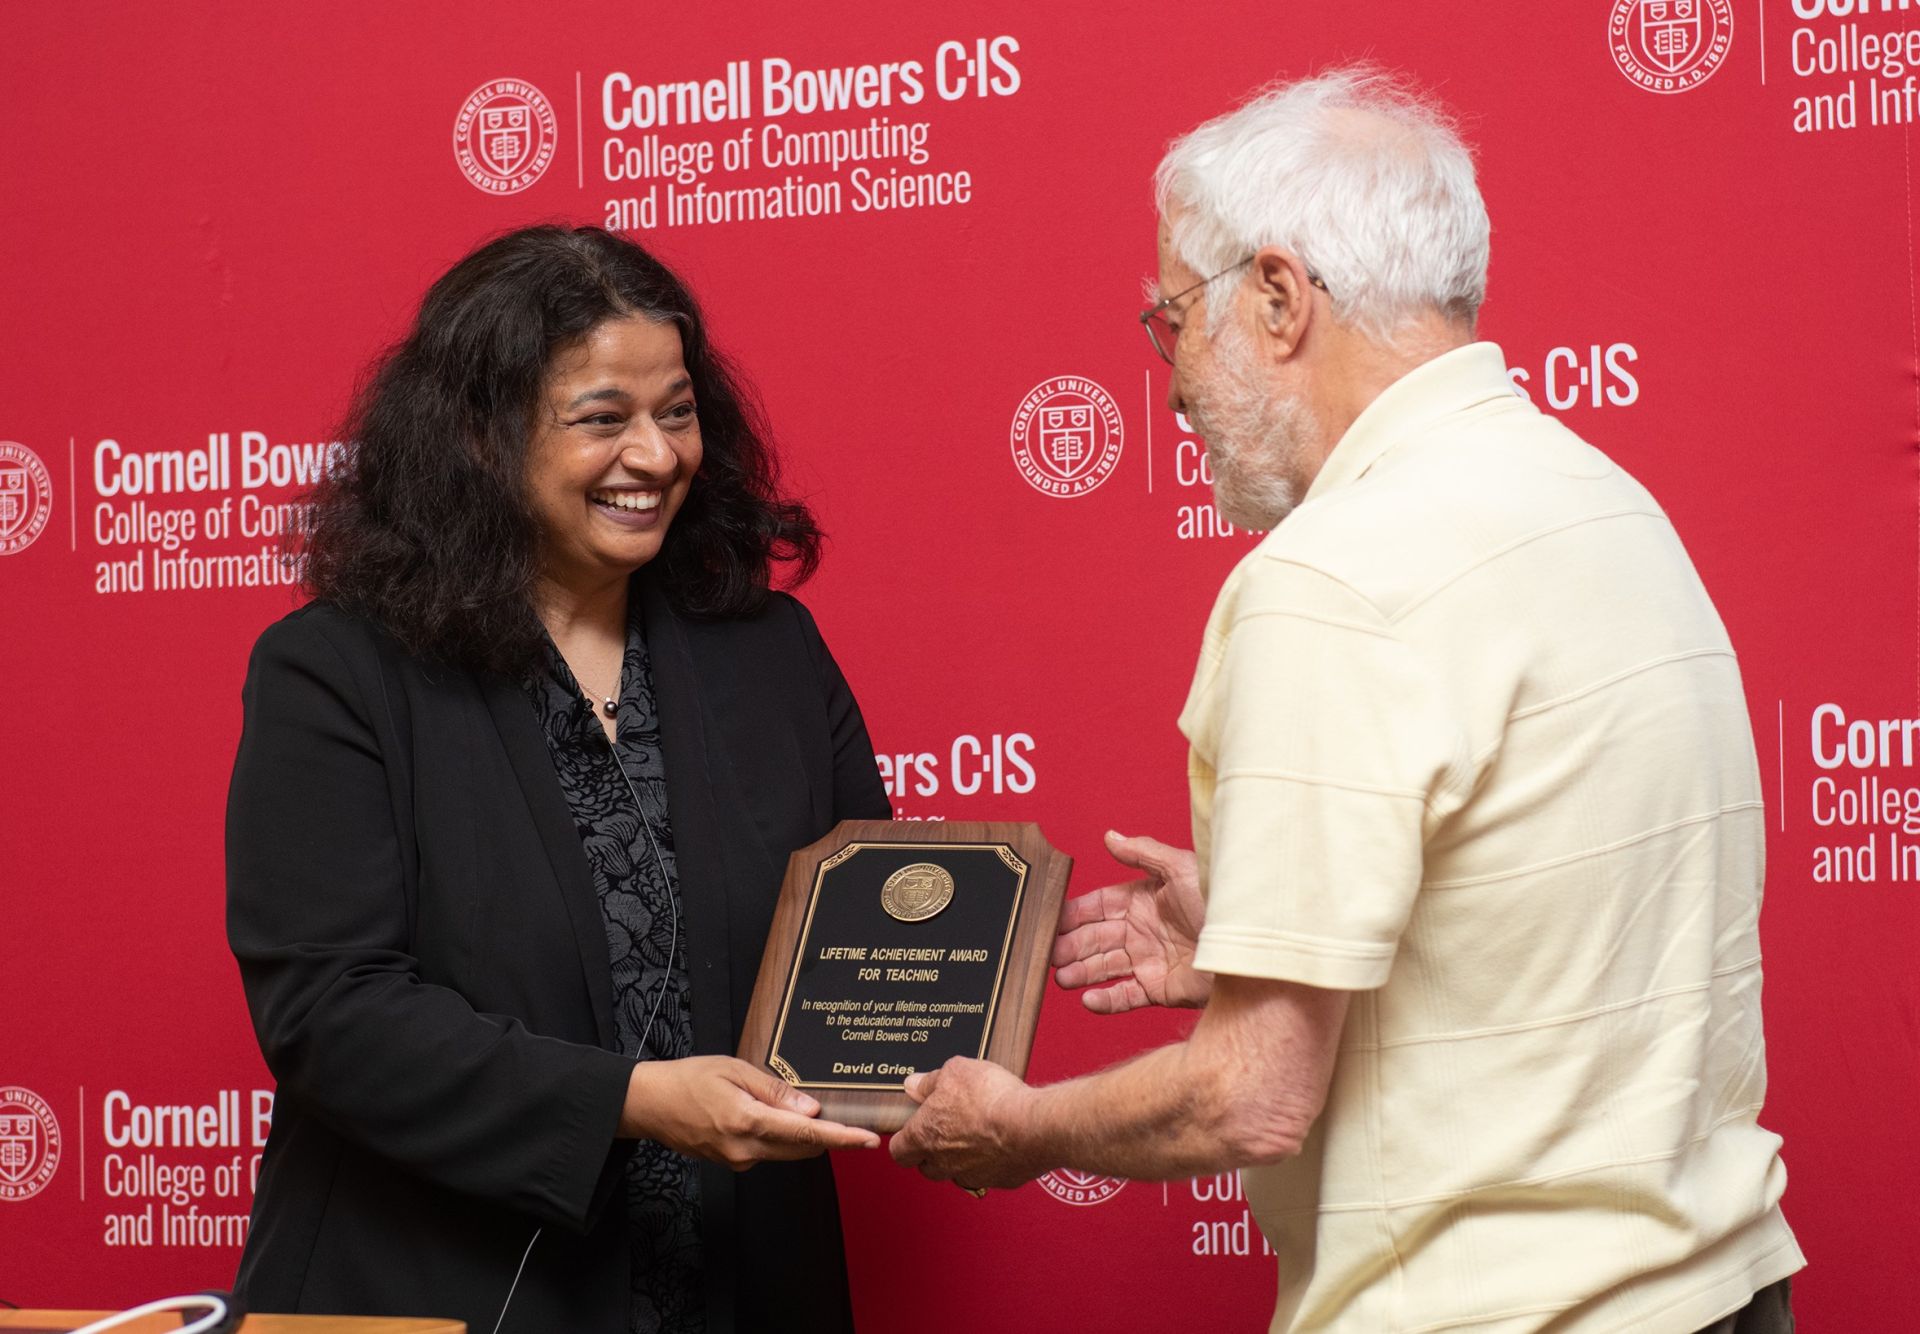 Dean Kavita Bala presents David Gries with the Lifetime Achievement Award in Teaching for his 51 years as an educator in Cornell’s Department of Computer Science.